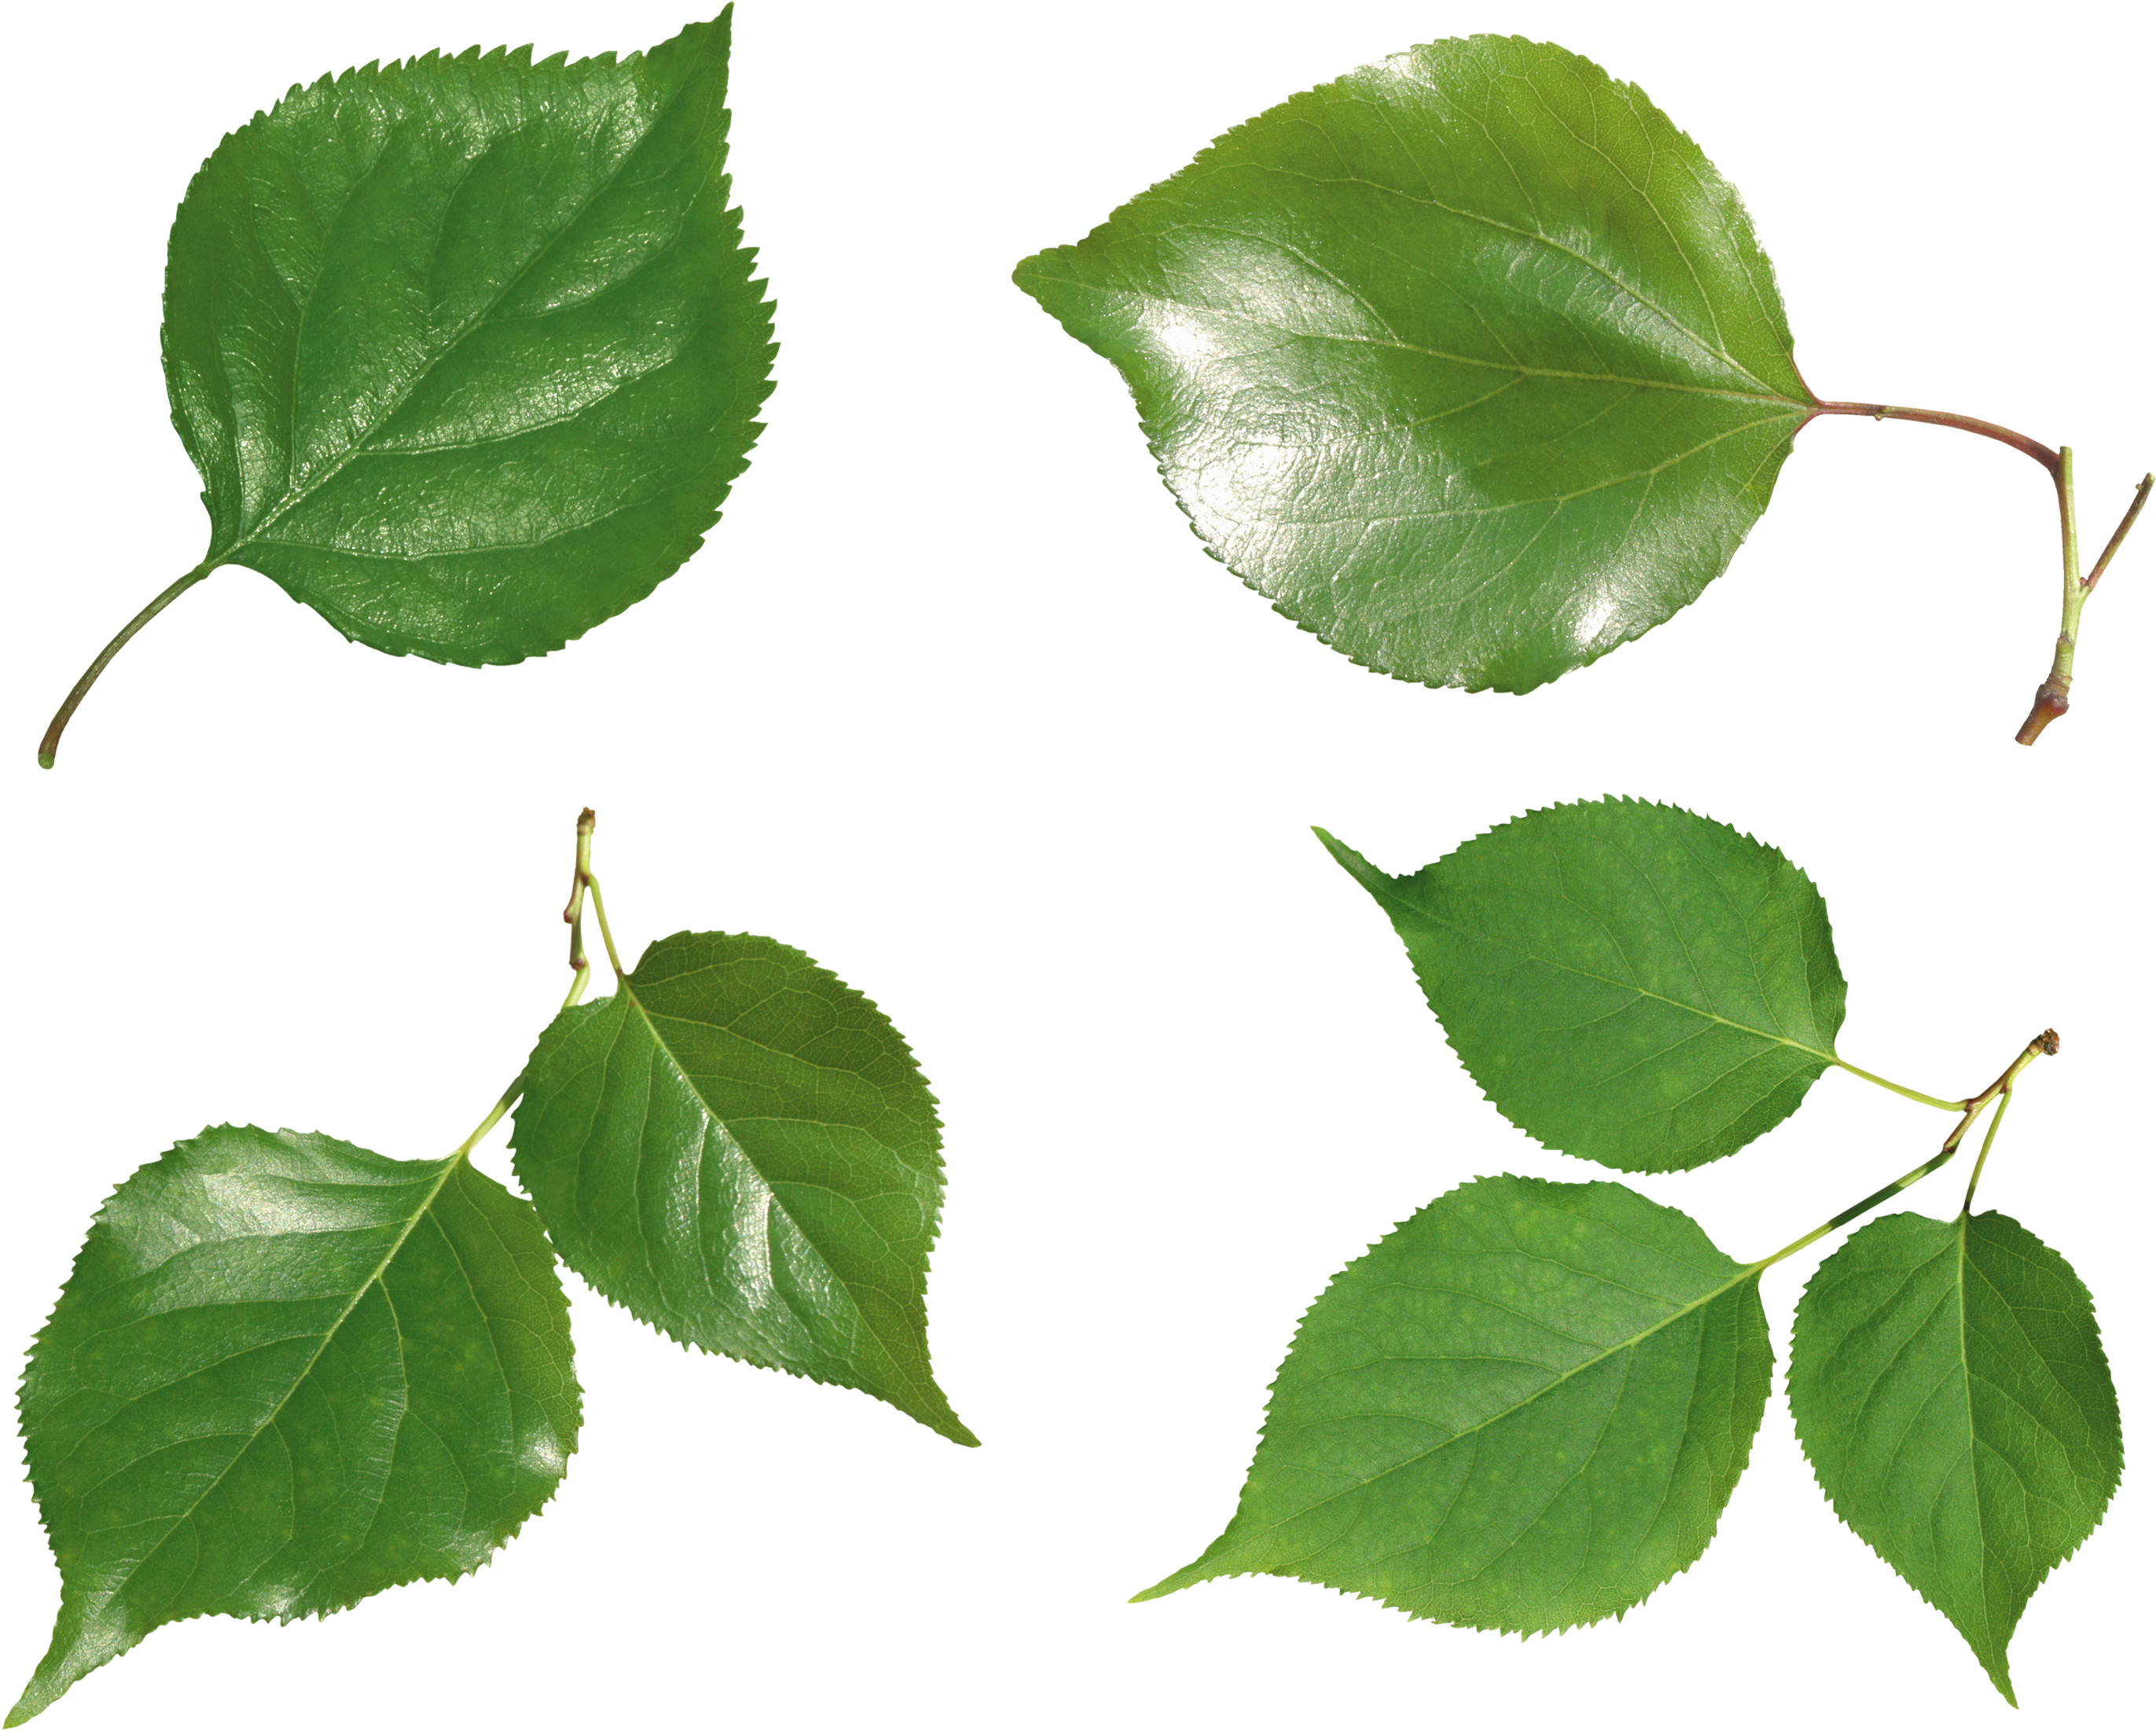 Green Leaves Png Image - Portable Network Graphics (2800x2386)